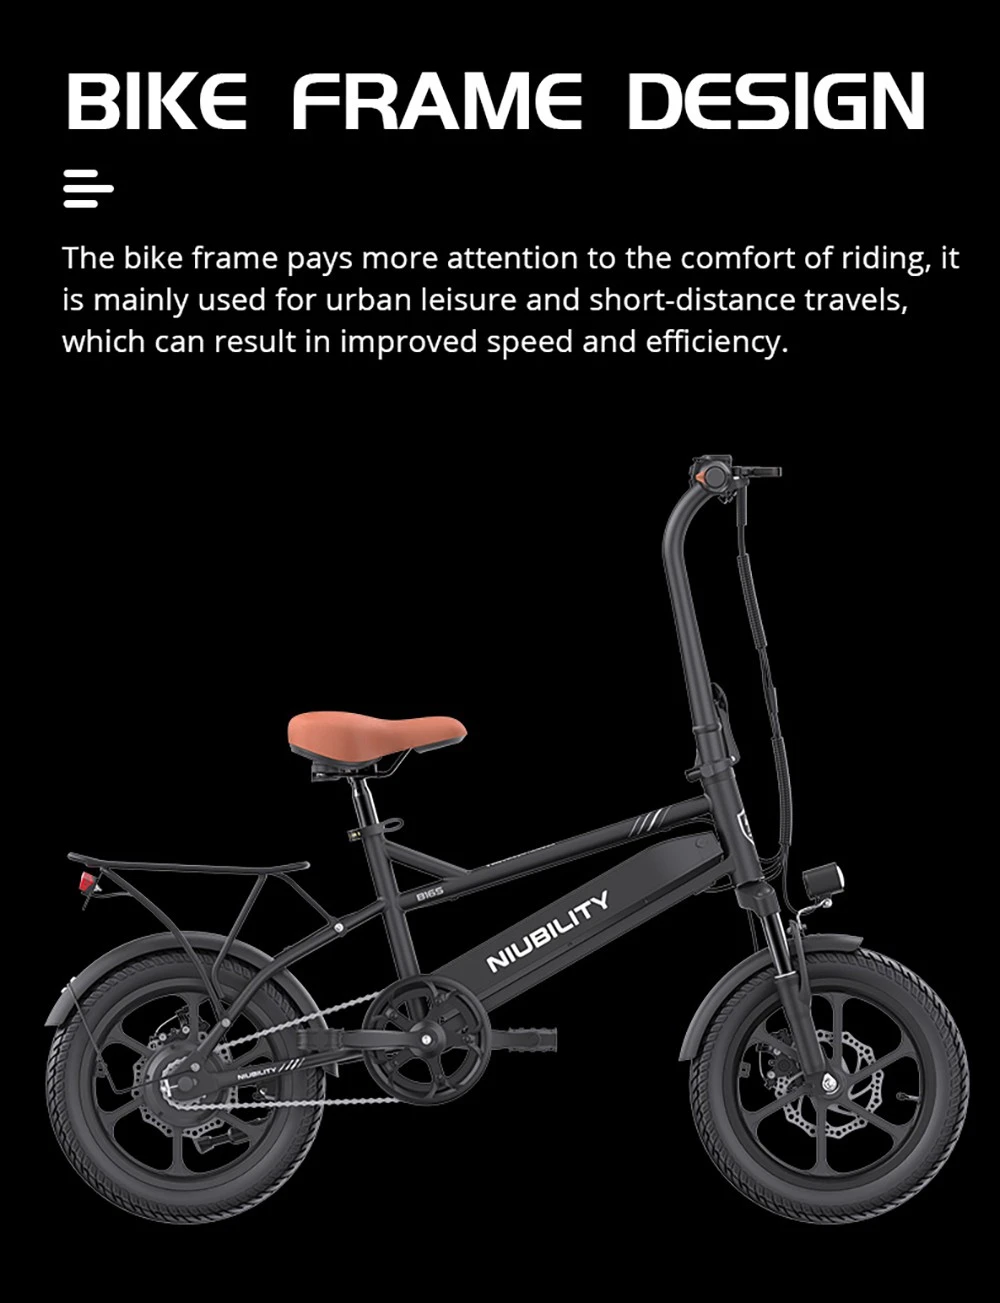 Niubility B16S Electric Bike, 350W Motor, 36V 14.5AH Battery, 16*2.125 Inches Tires, 30km/h Max Speed, 60km Range, Front & Rear Disc Brakes, LCD Display